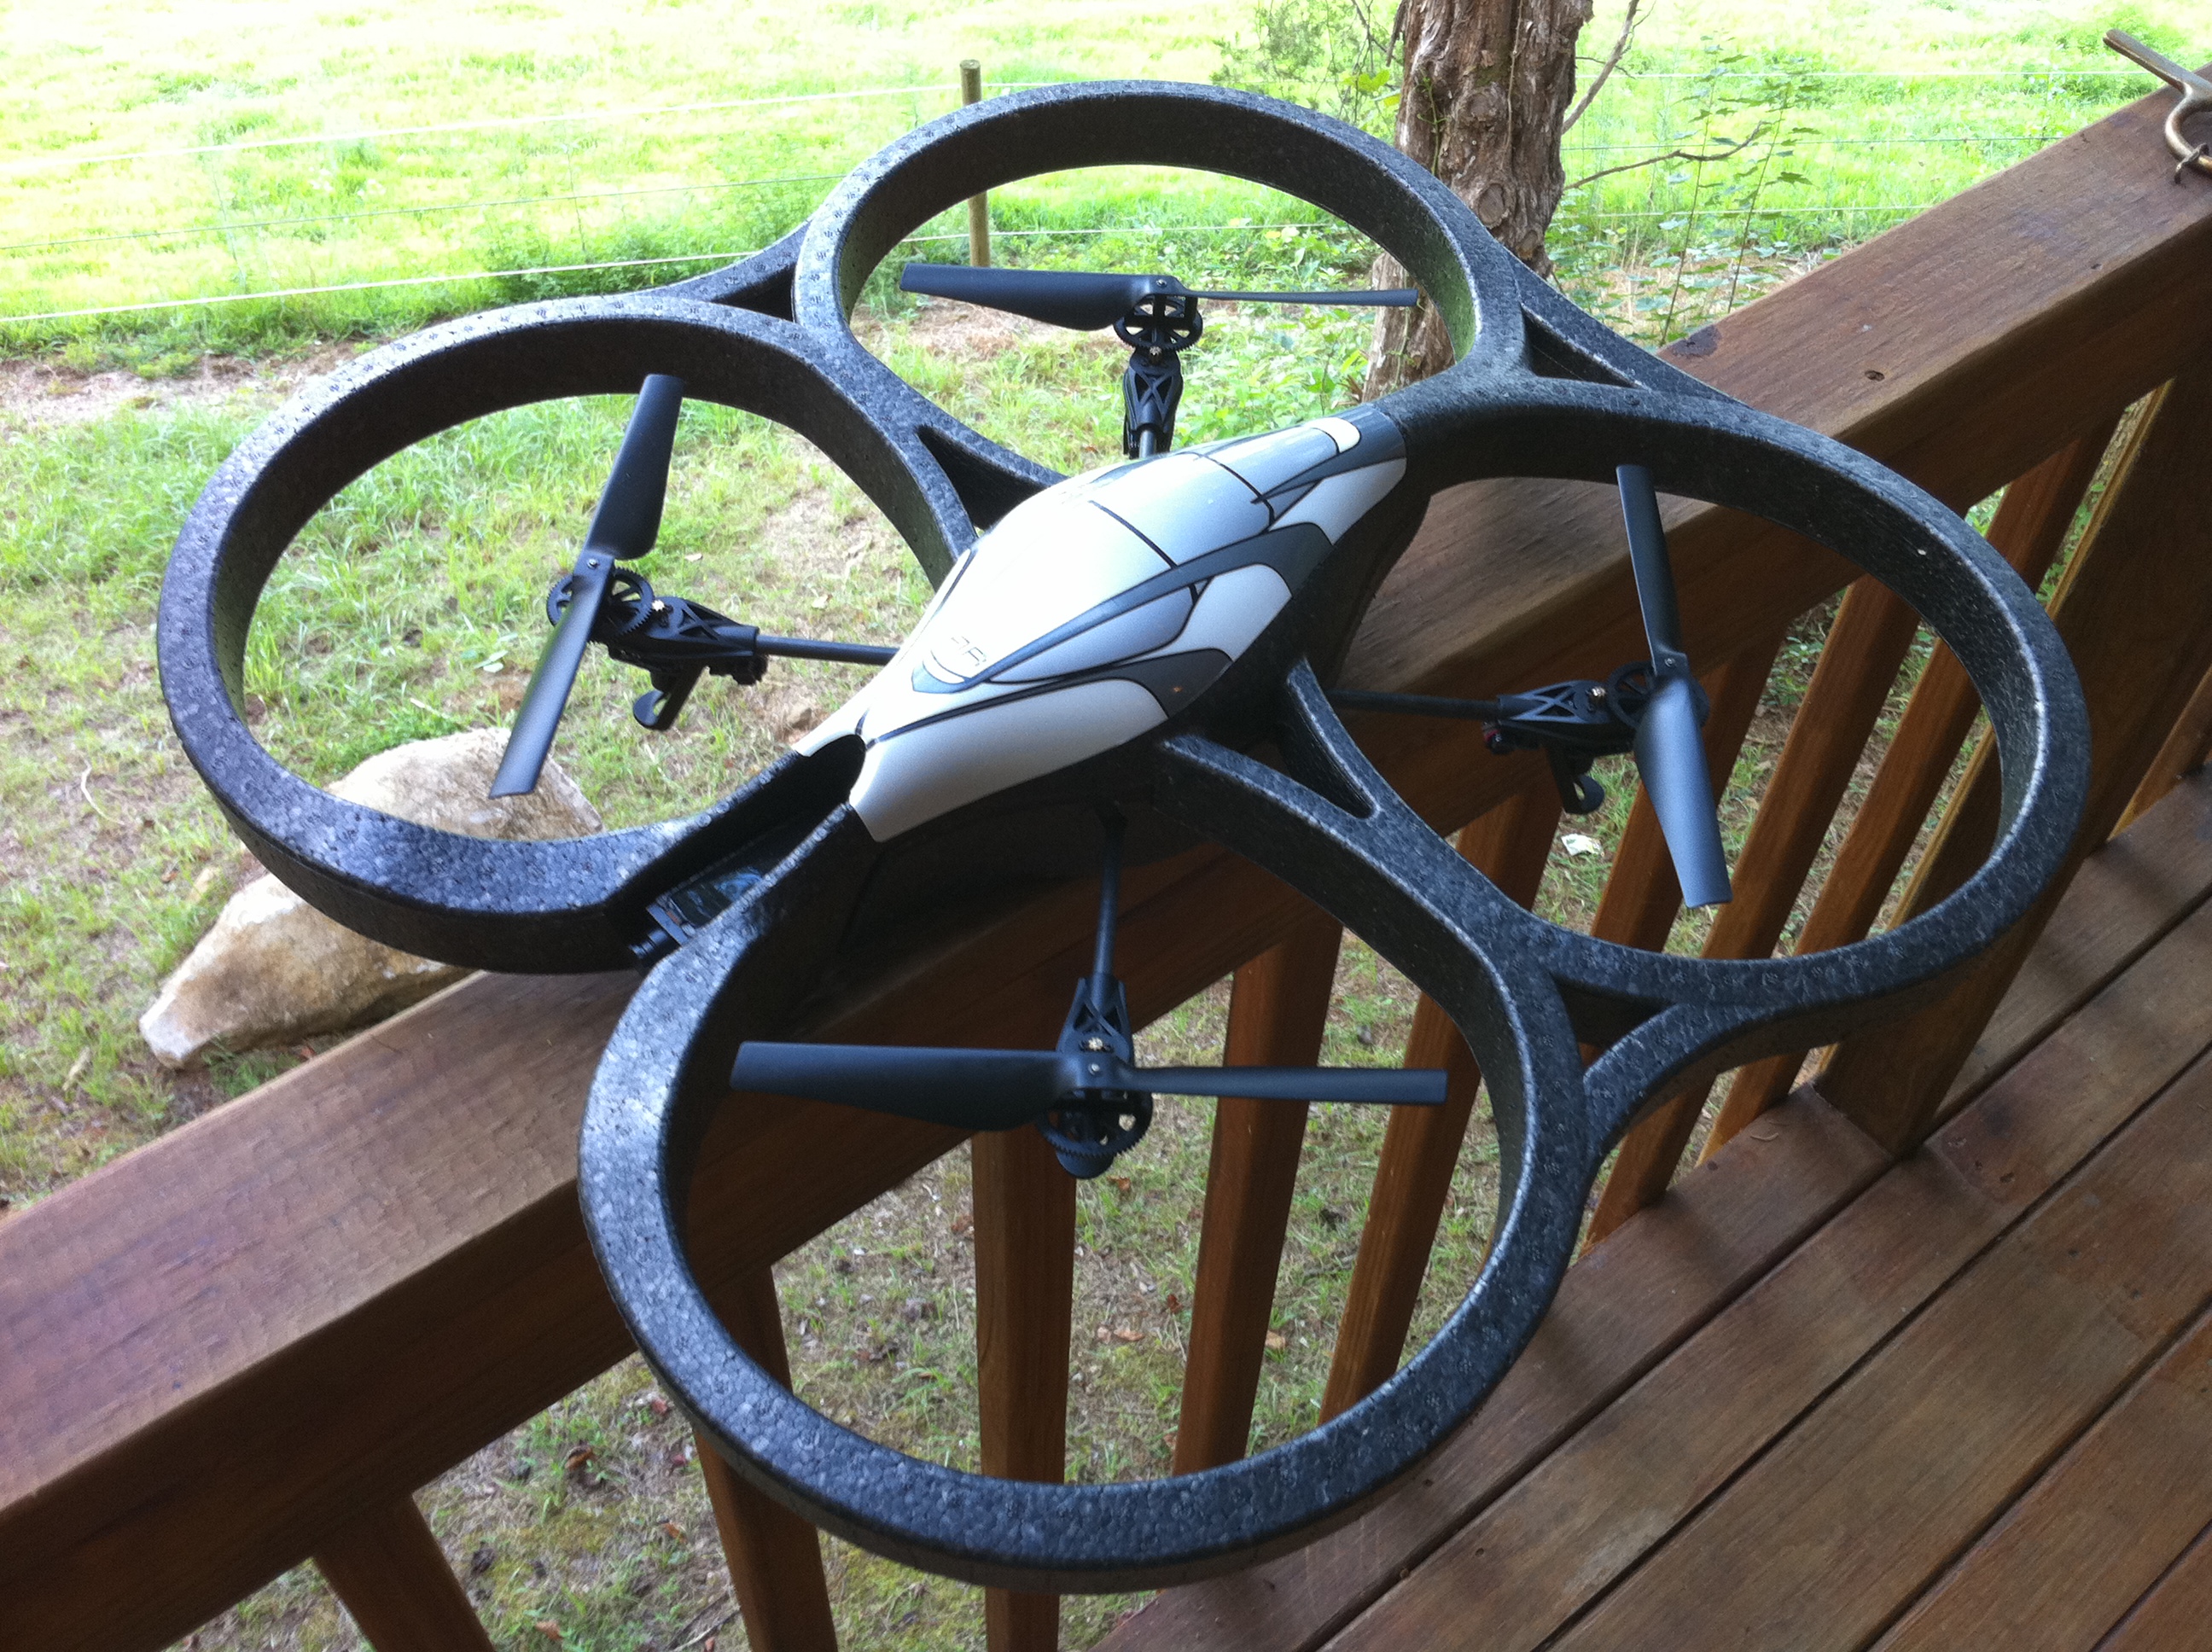 Parrot AR.Drone – The Coolest RC Toy I've Played With – TouchArcade